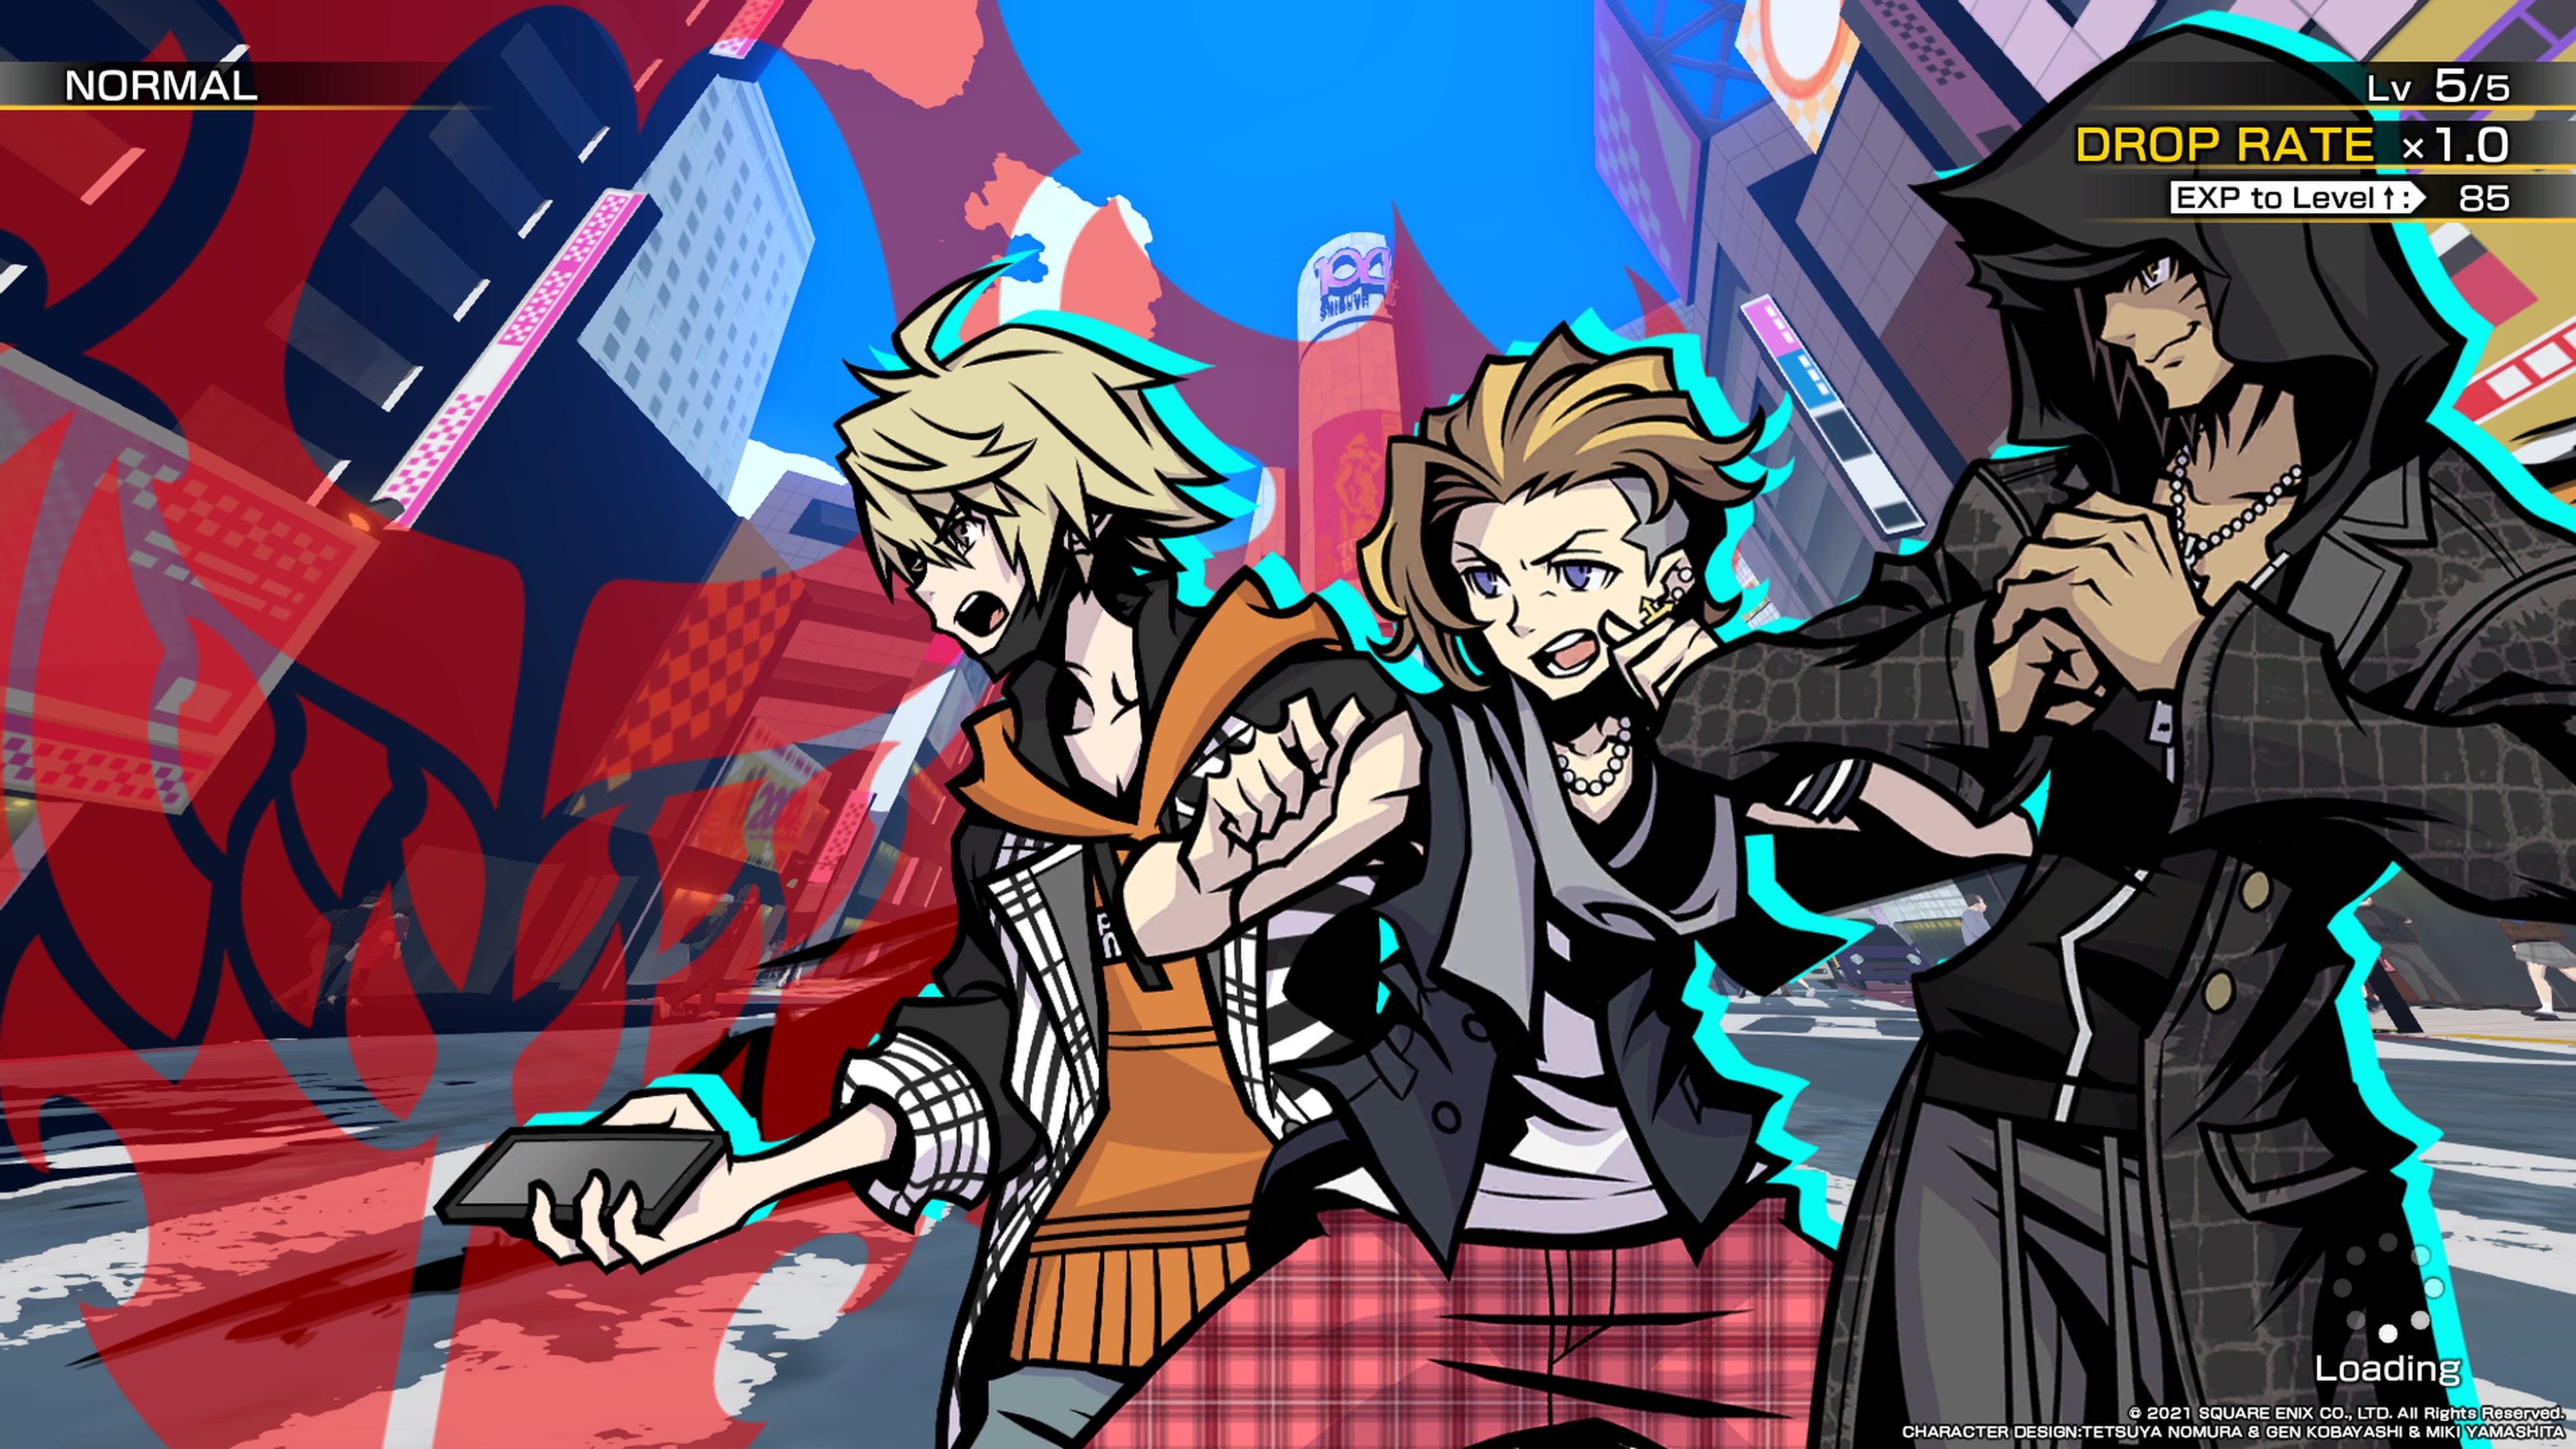 Neo The World Ends With You PS4 Review #75